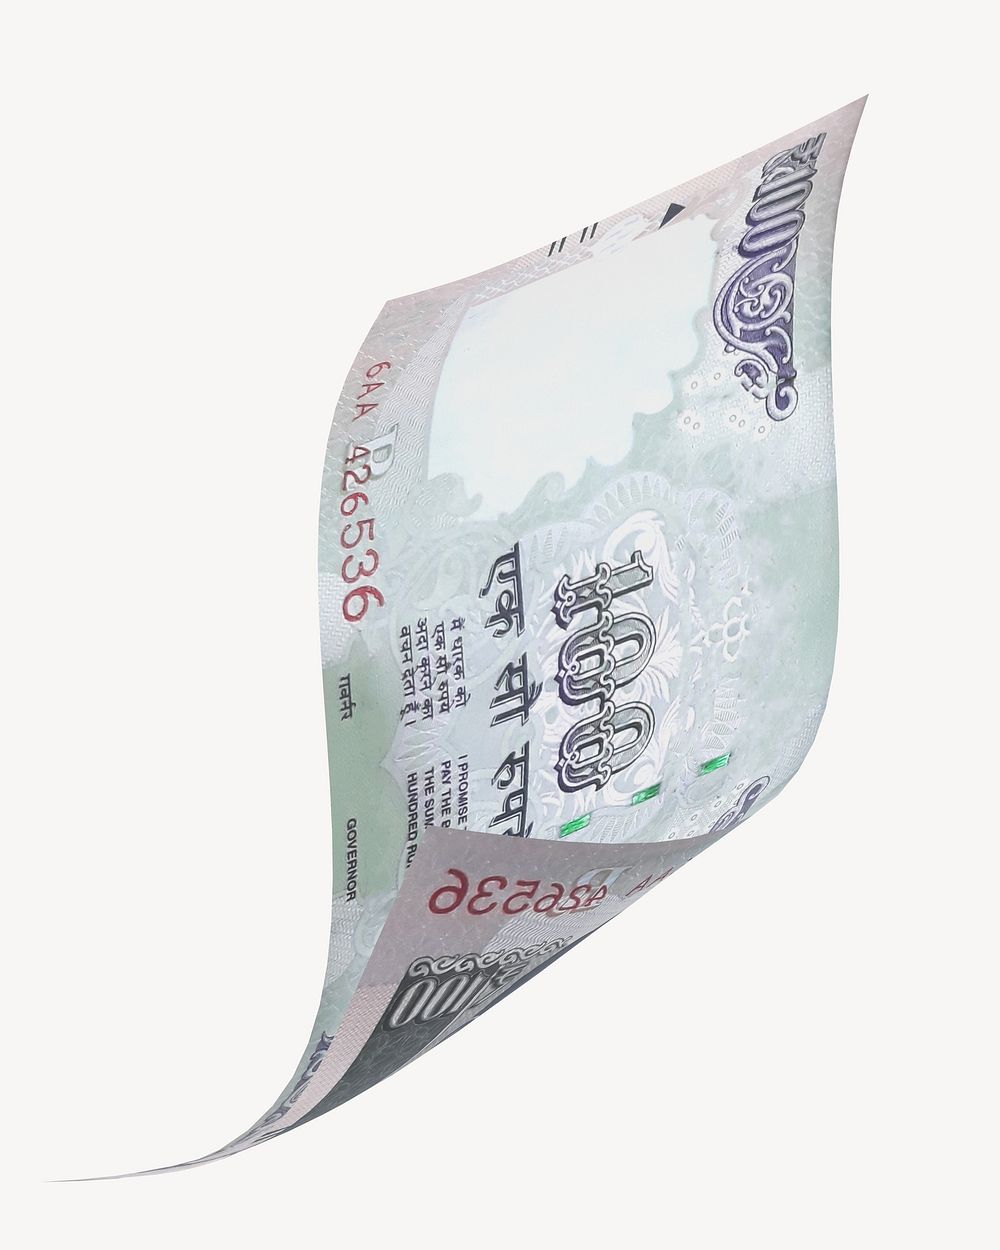 Indian 100 Rupees bank note